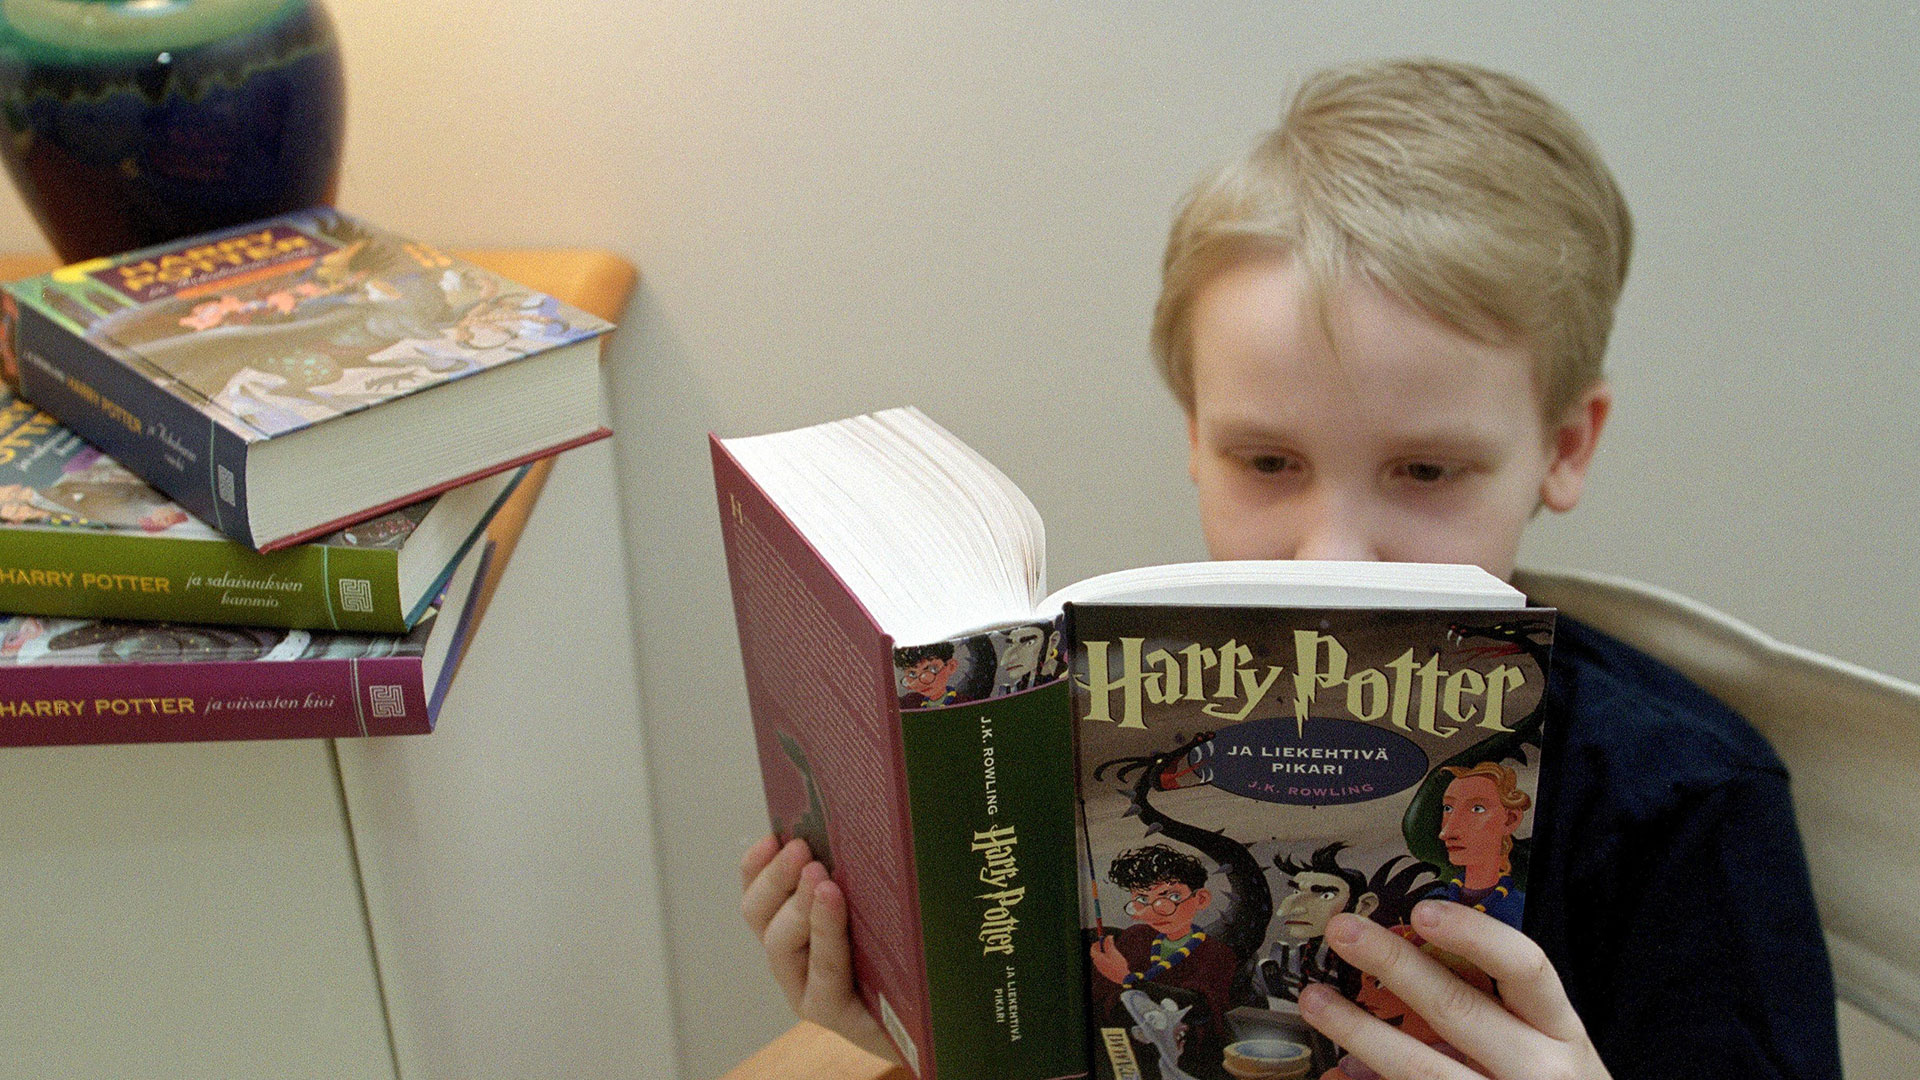 Child reading Harry Potter book